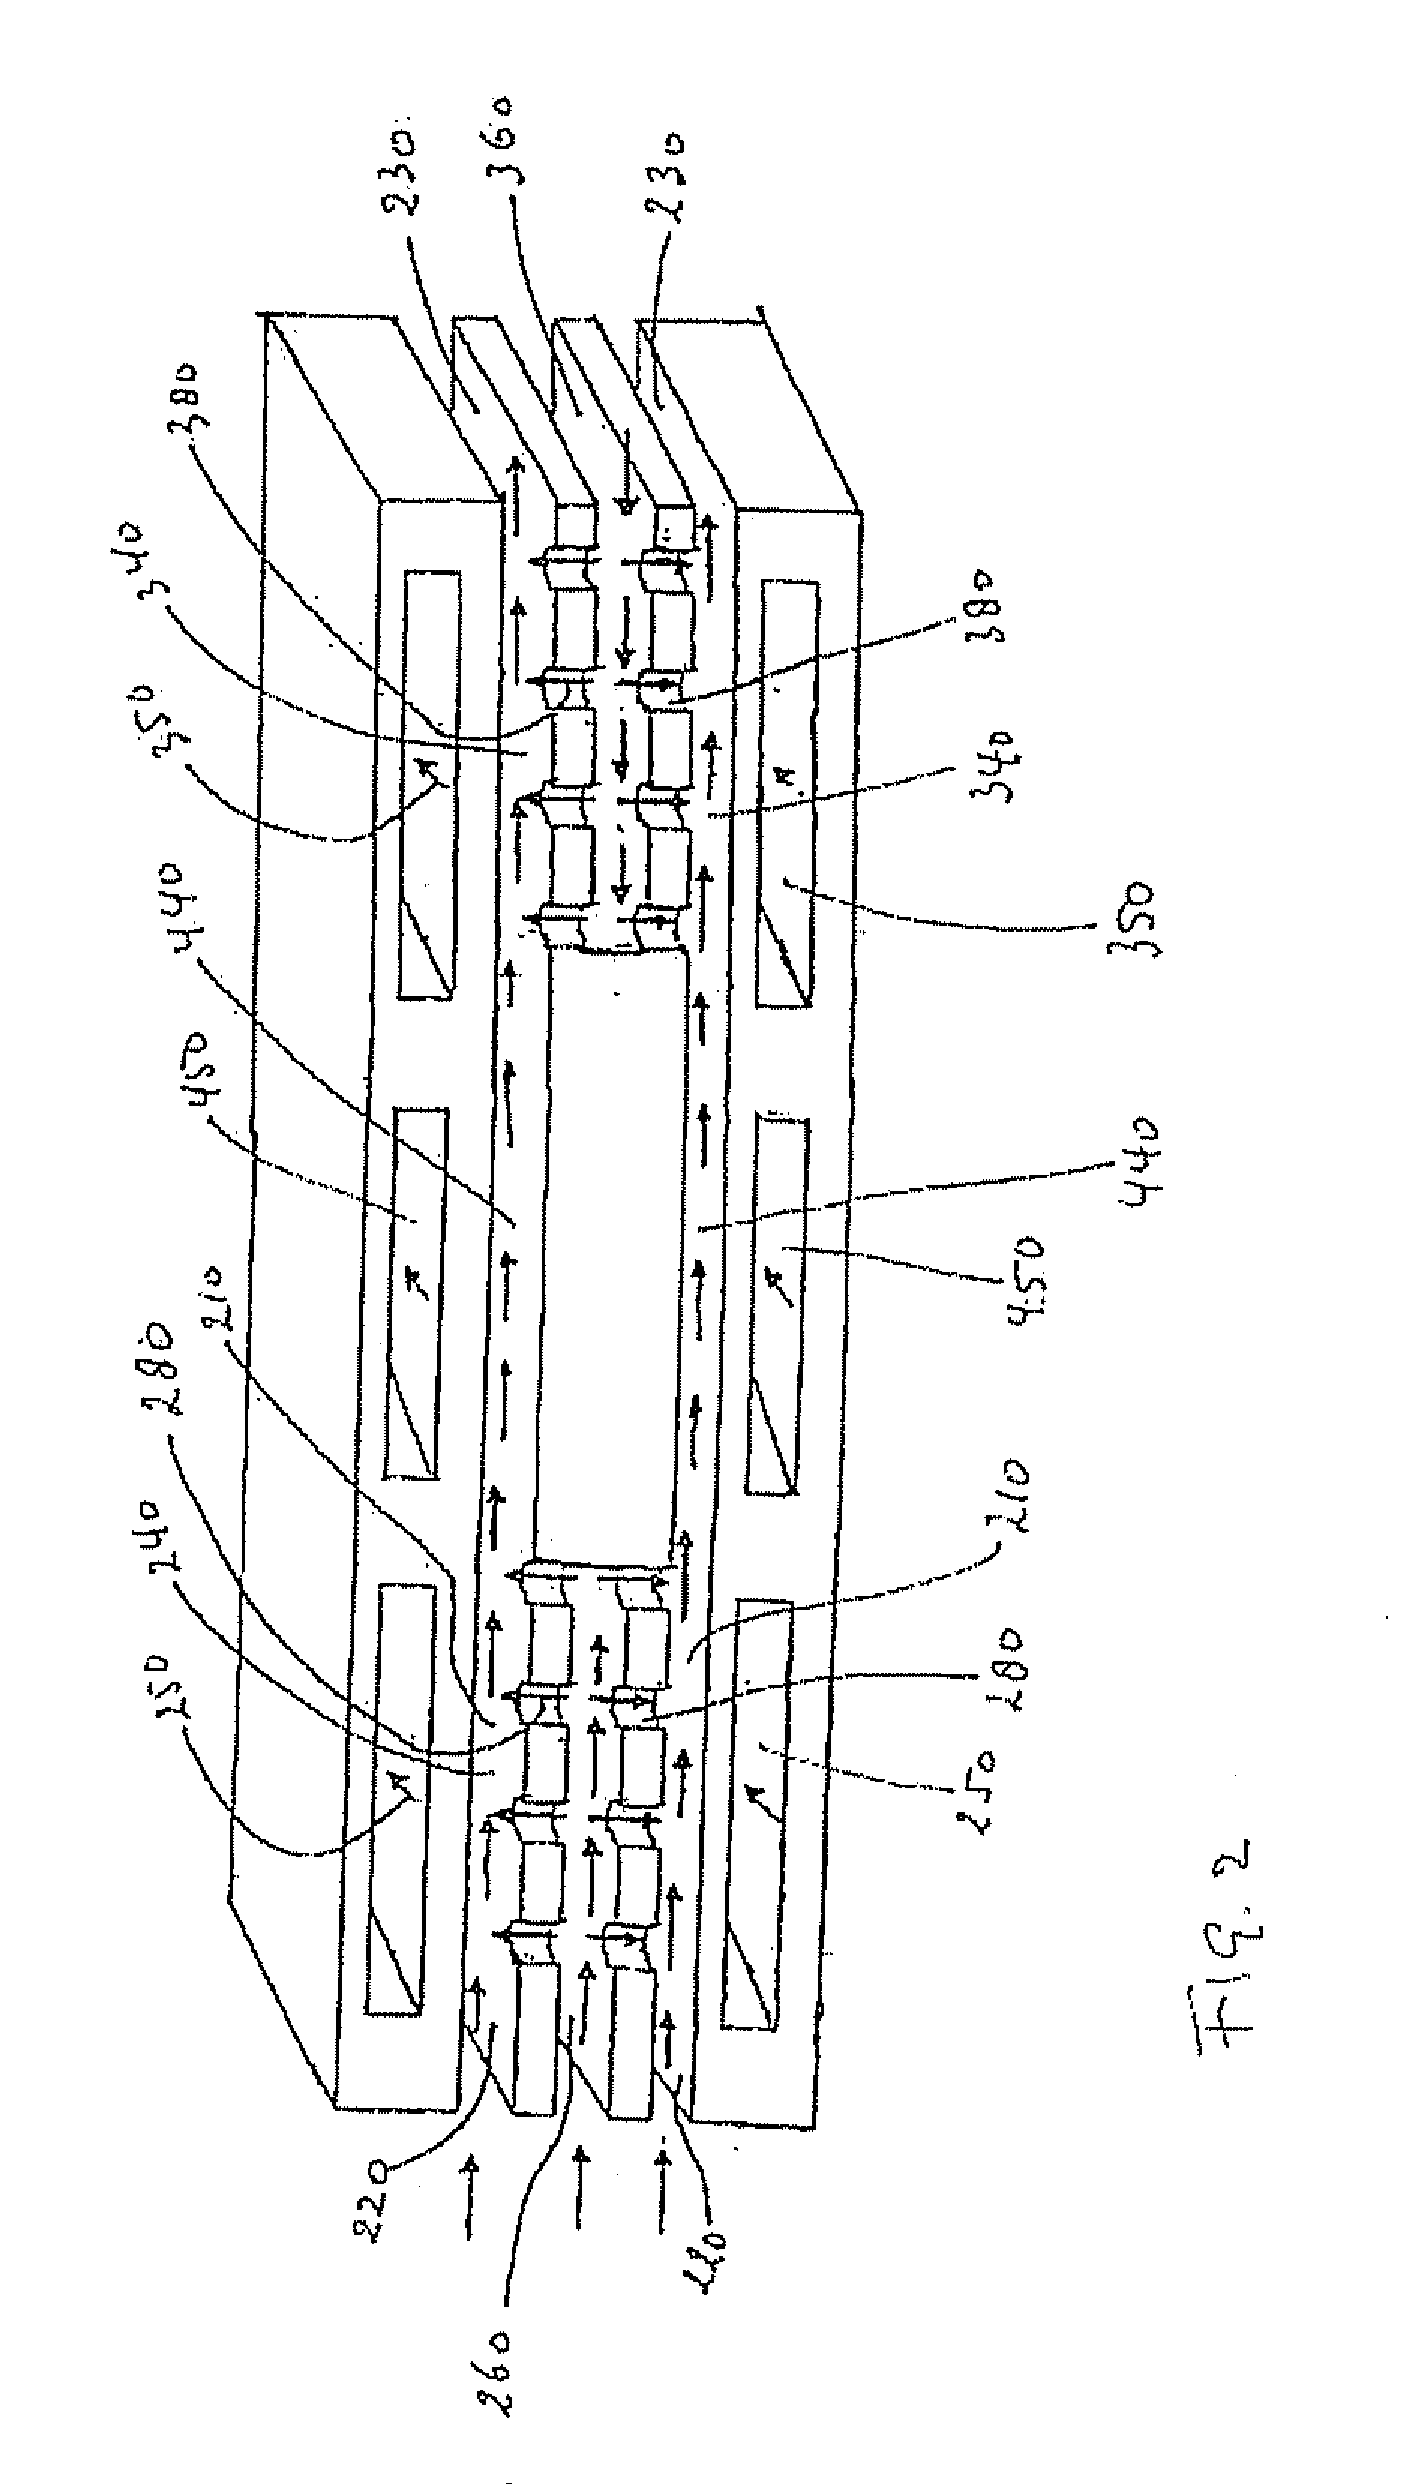 Method of installing an epoxidation catalyst in a reactor, a method of preparing an epoxidation catalyst, an epoxidation catalyst, a process for the preparation of an olefin oxide or a chemical derivable from an olefin oxide, and a reactor suitables for such a process